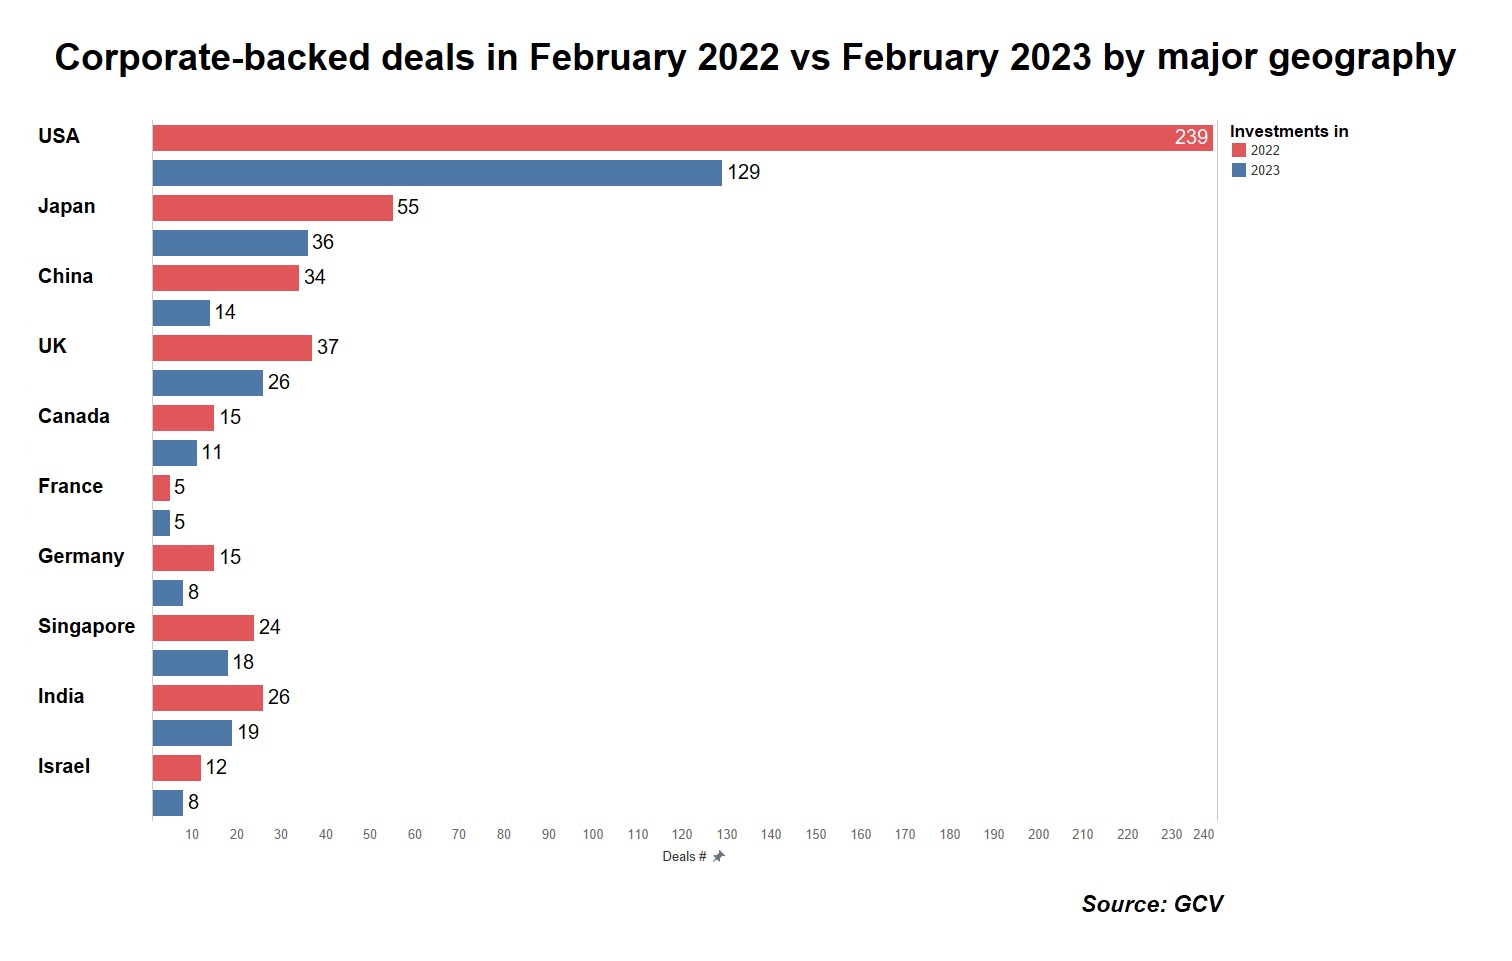 Chart showing corporate-backed deals in February 2022 vs February 2023 by major geography. Source: GCV